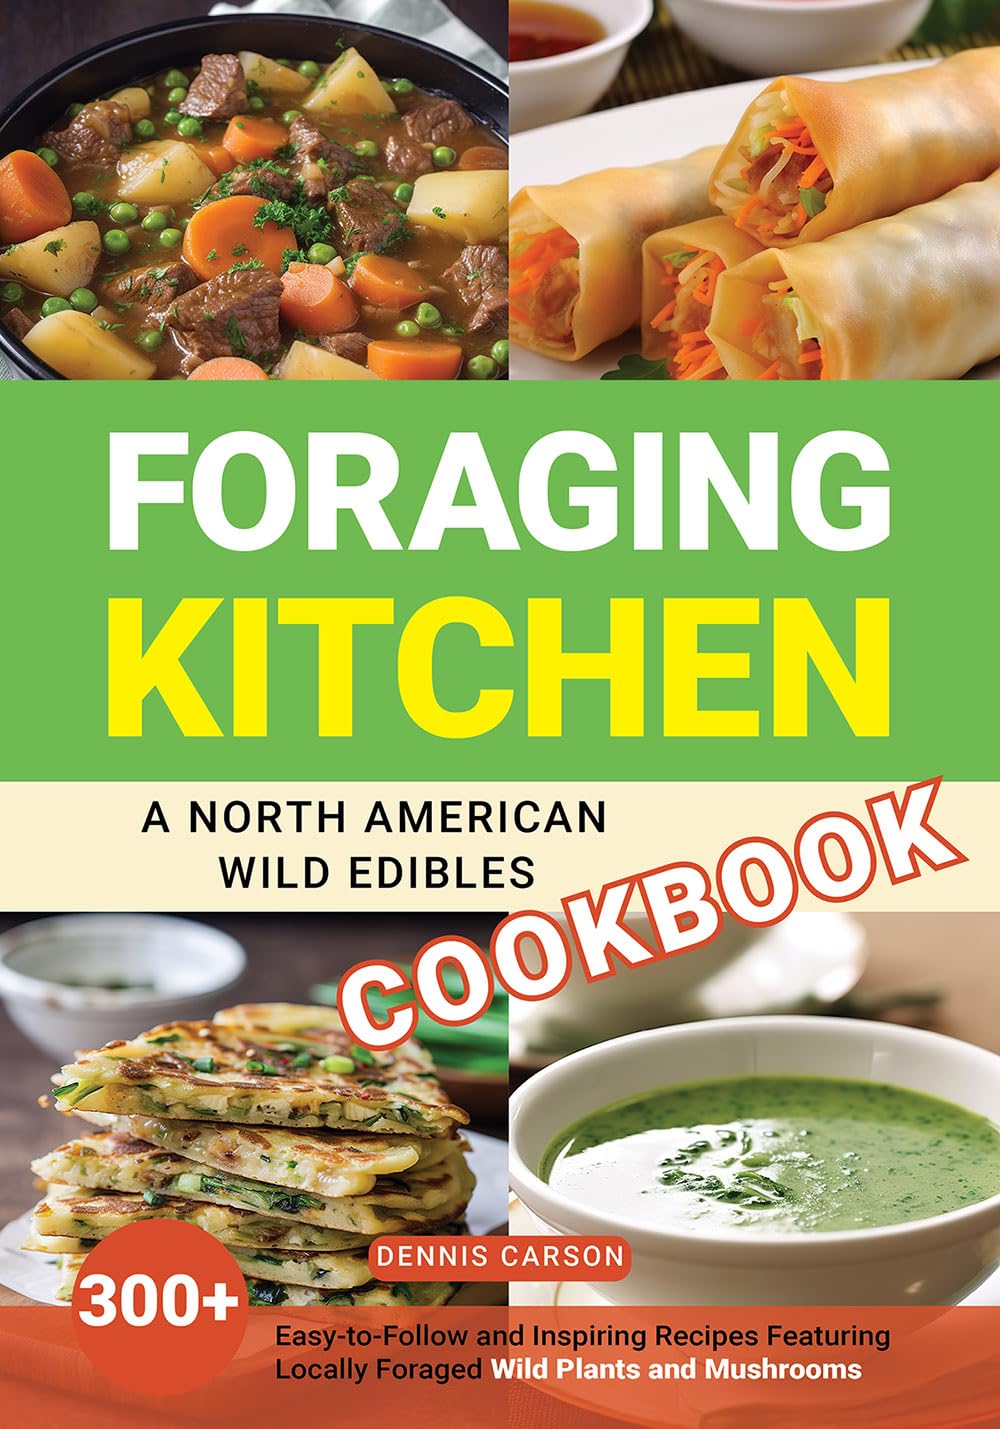 Foraging Kitchen: A North American Wild Edibles Cookbook: 300+ Easy-to-Follow and Inspiring Recipes Featuring Locally Foraged Wild Plants and Mushrooms (Off Grid Living)